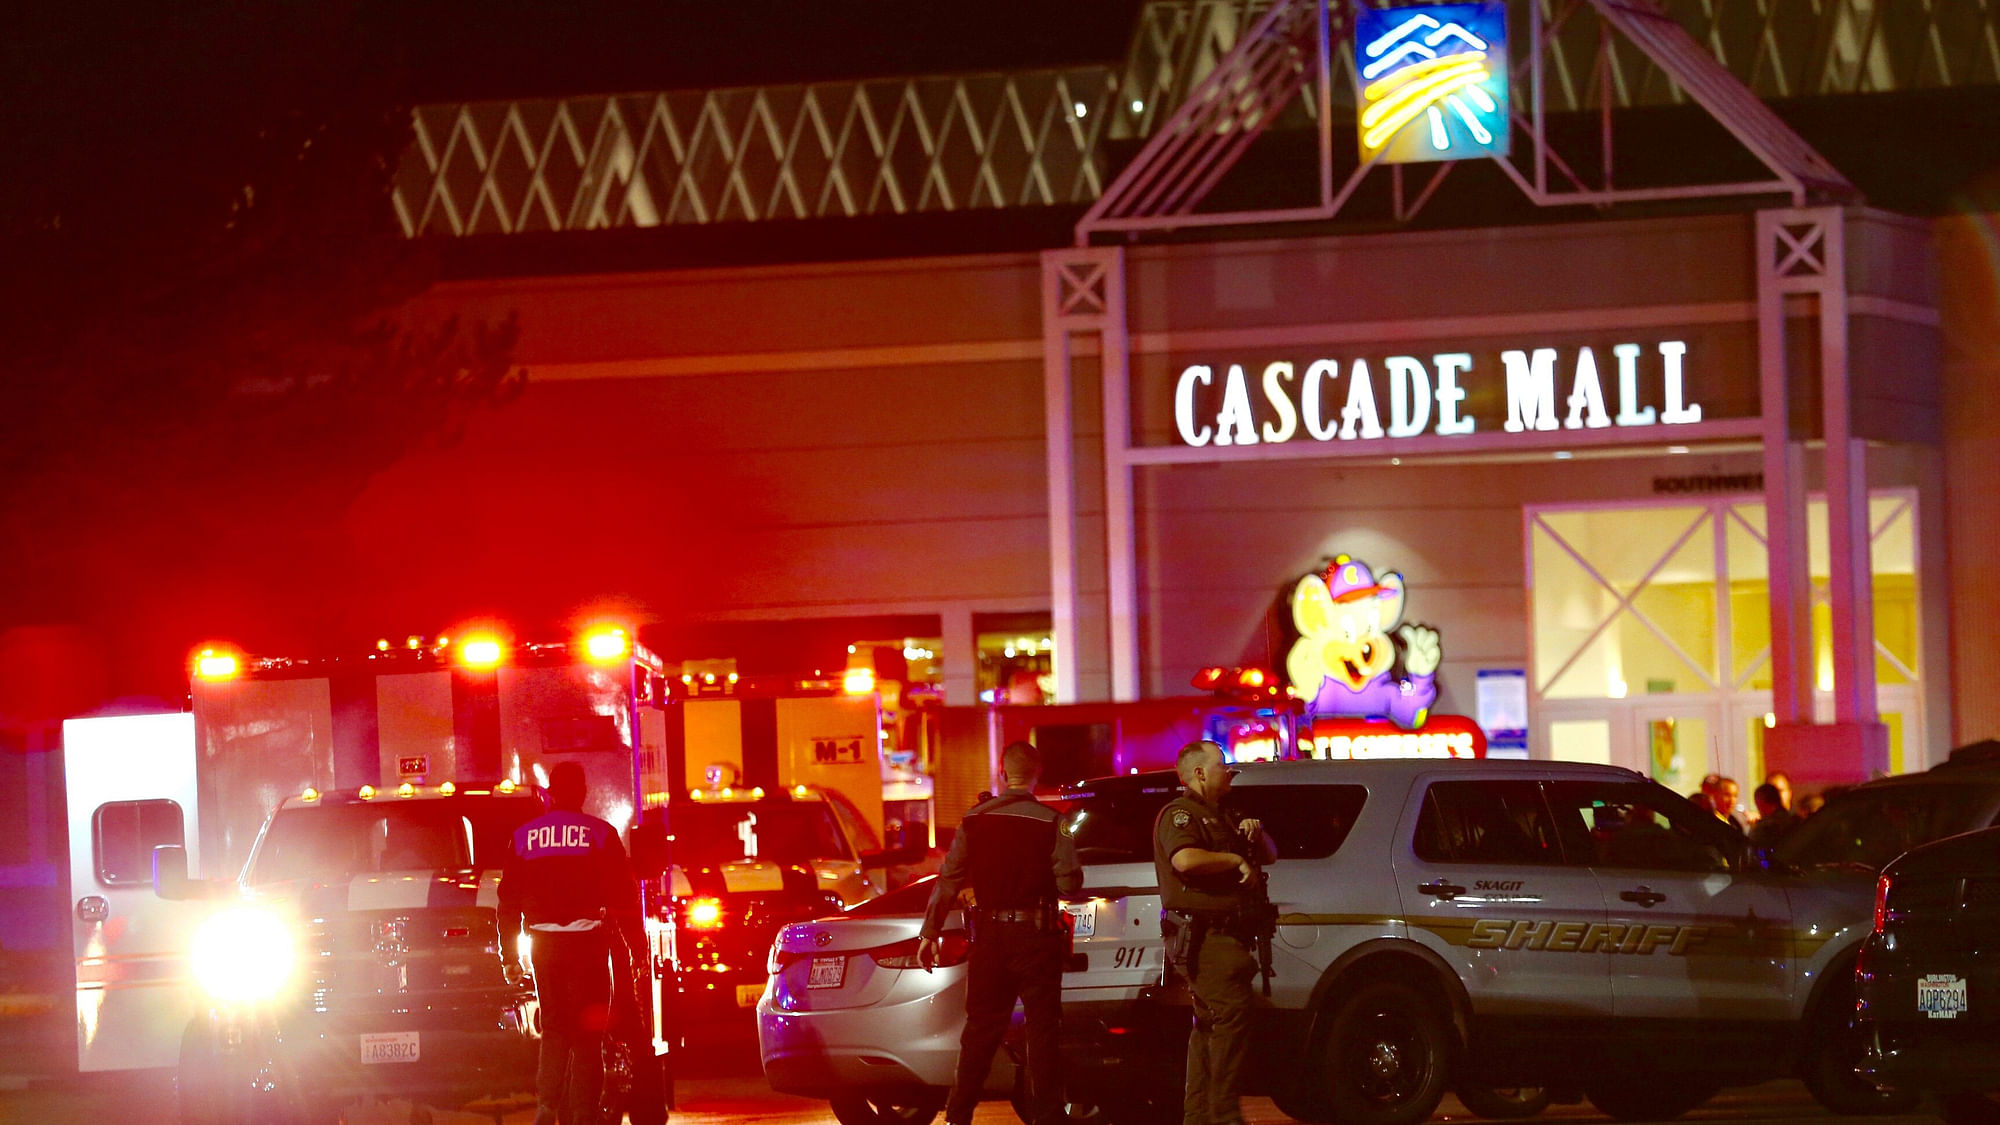 

The Washington State Patrol spokesperson said on Twitter that at least three people were killed on Friday evening at the Cascade Mall in Burlington. (Photo: AP)